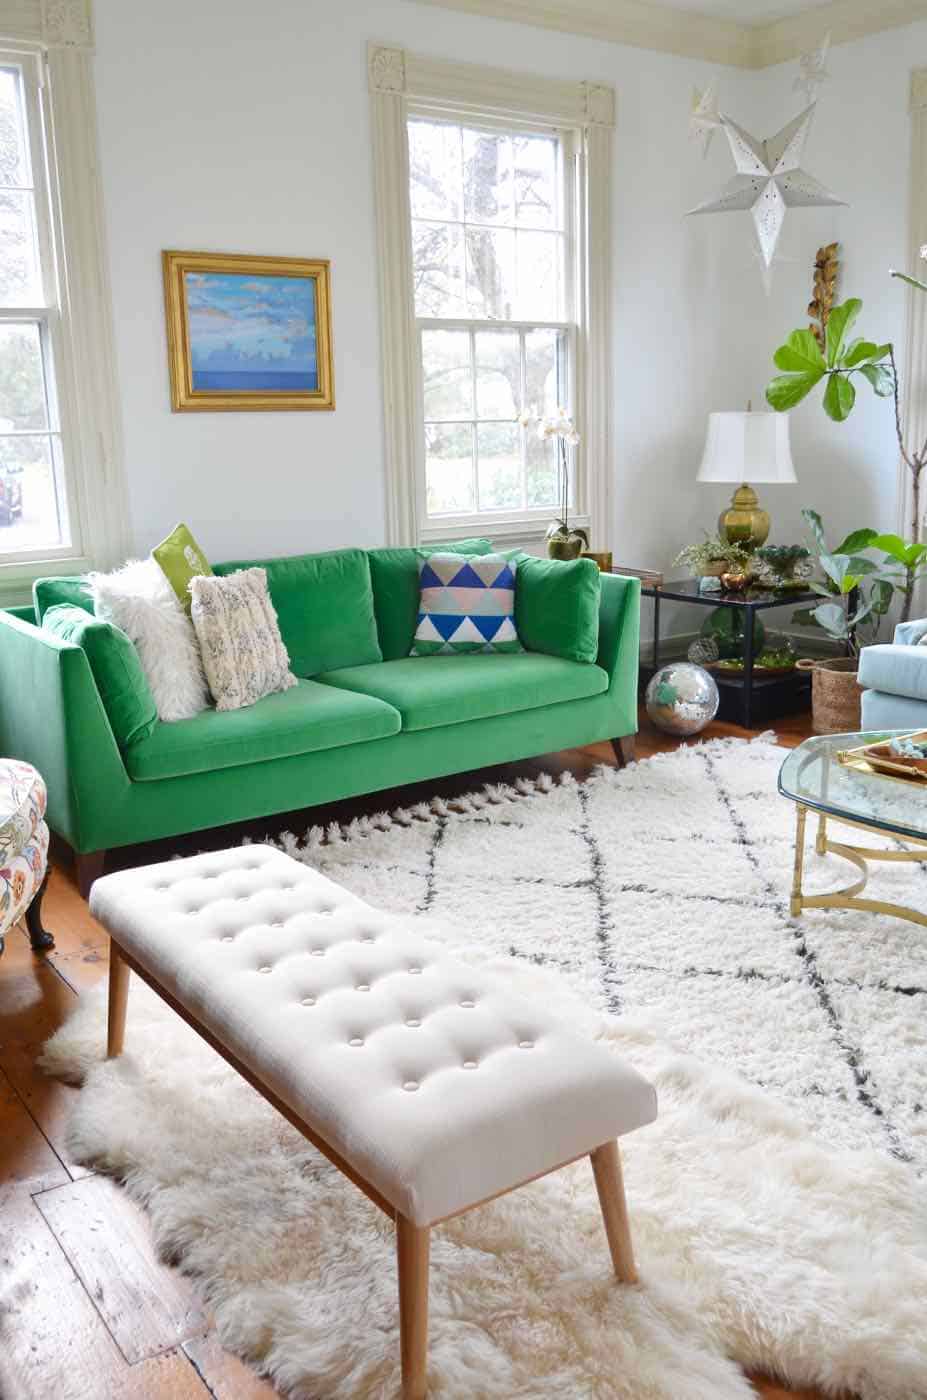 Living room refresh to open up the space and brighten the room.